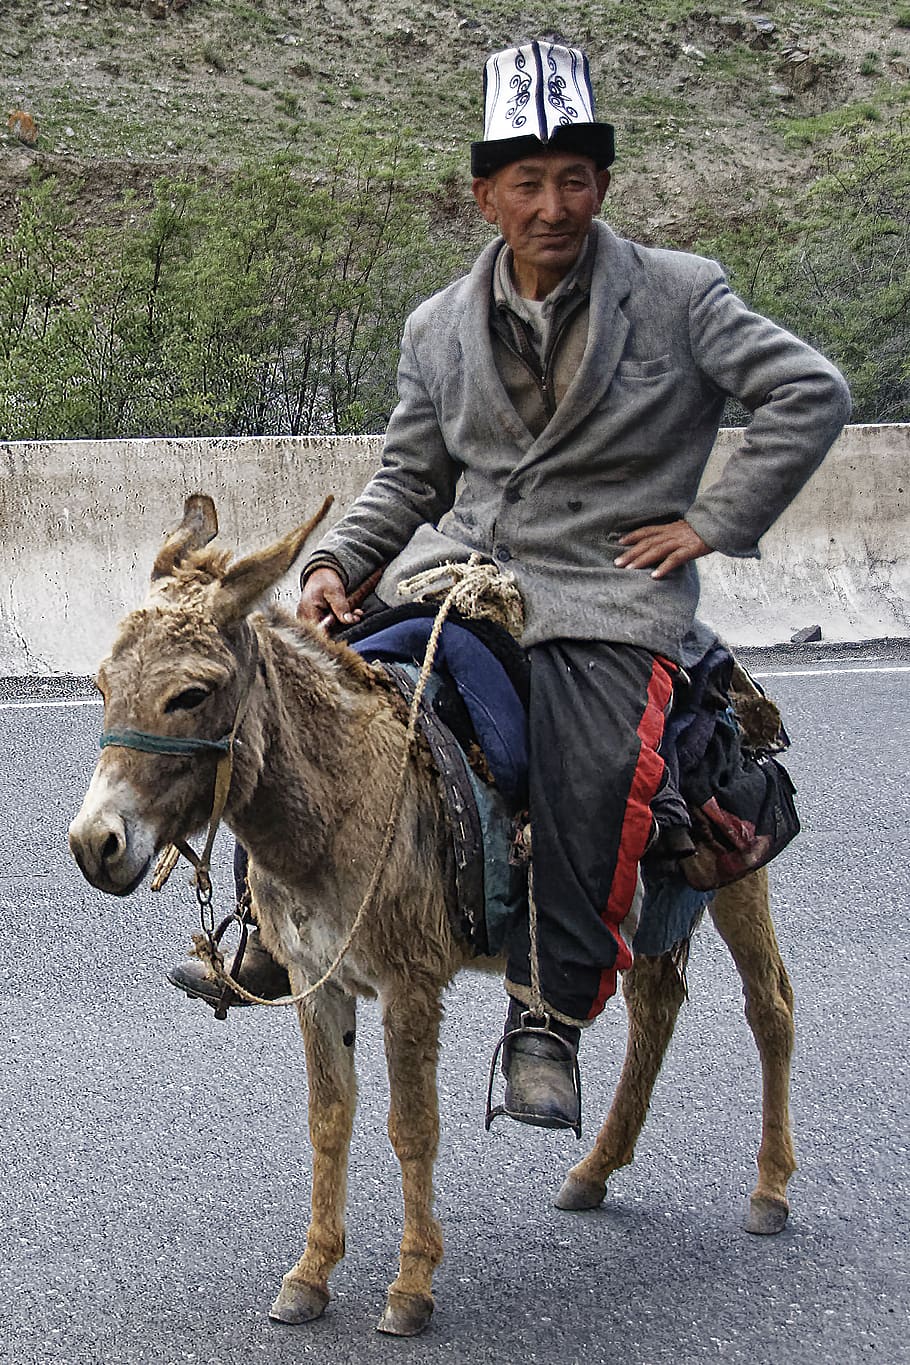 man, donkey, human, animal, ride, culture, costume, hat, kyrgyzstan, traditional